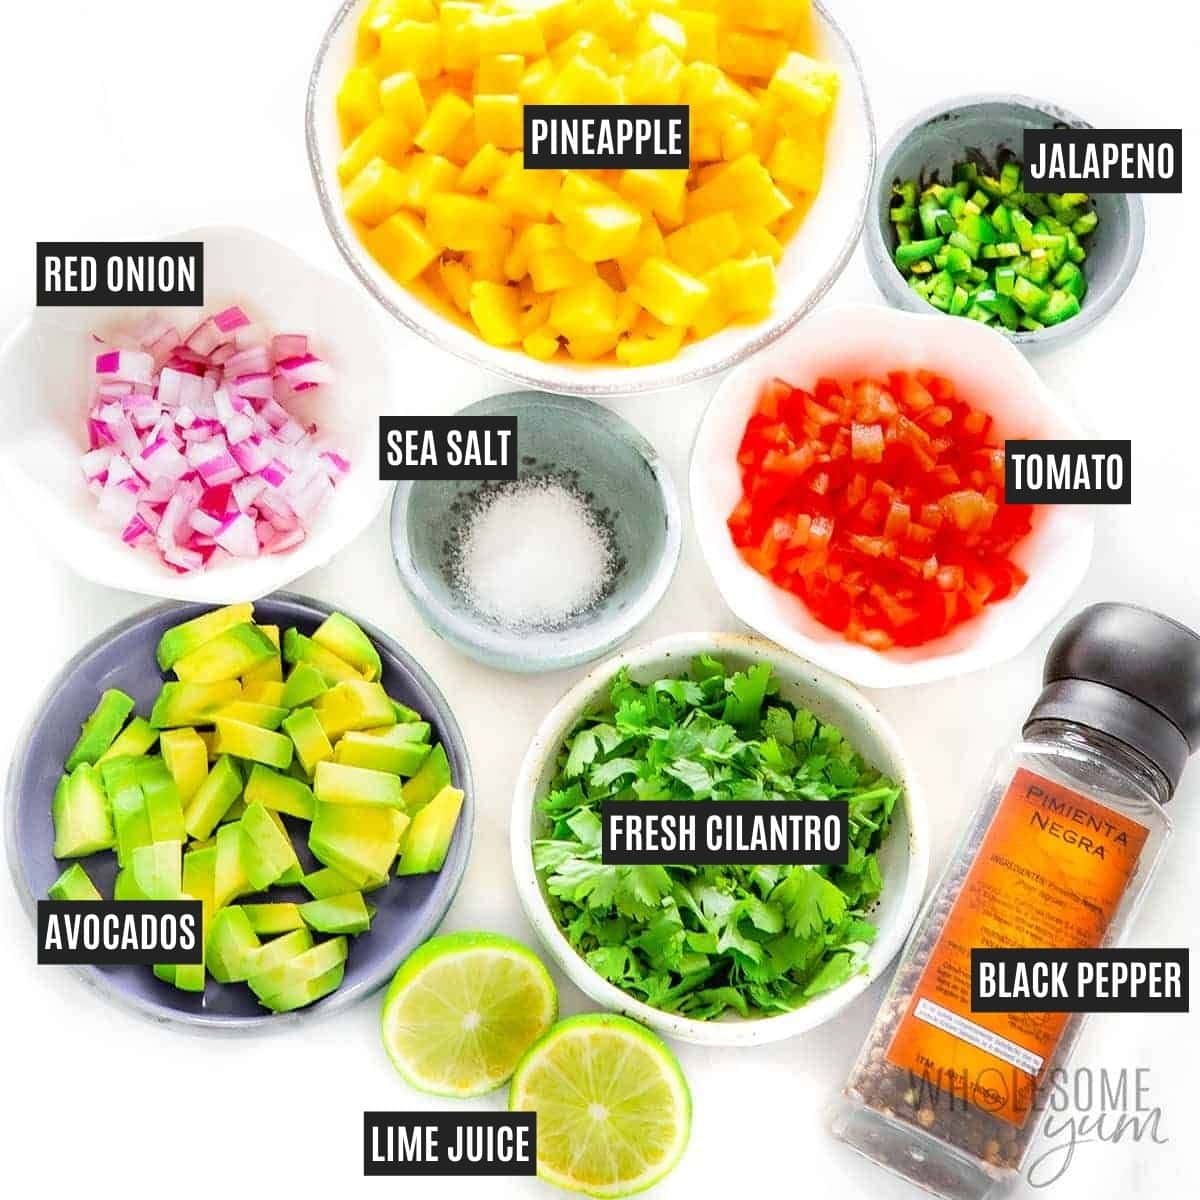 Pineapple salad ingredients in a bowl.